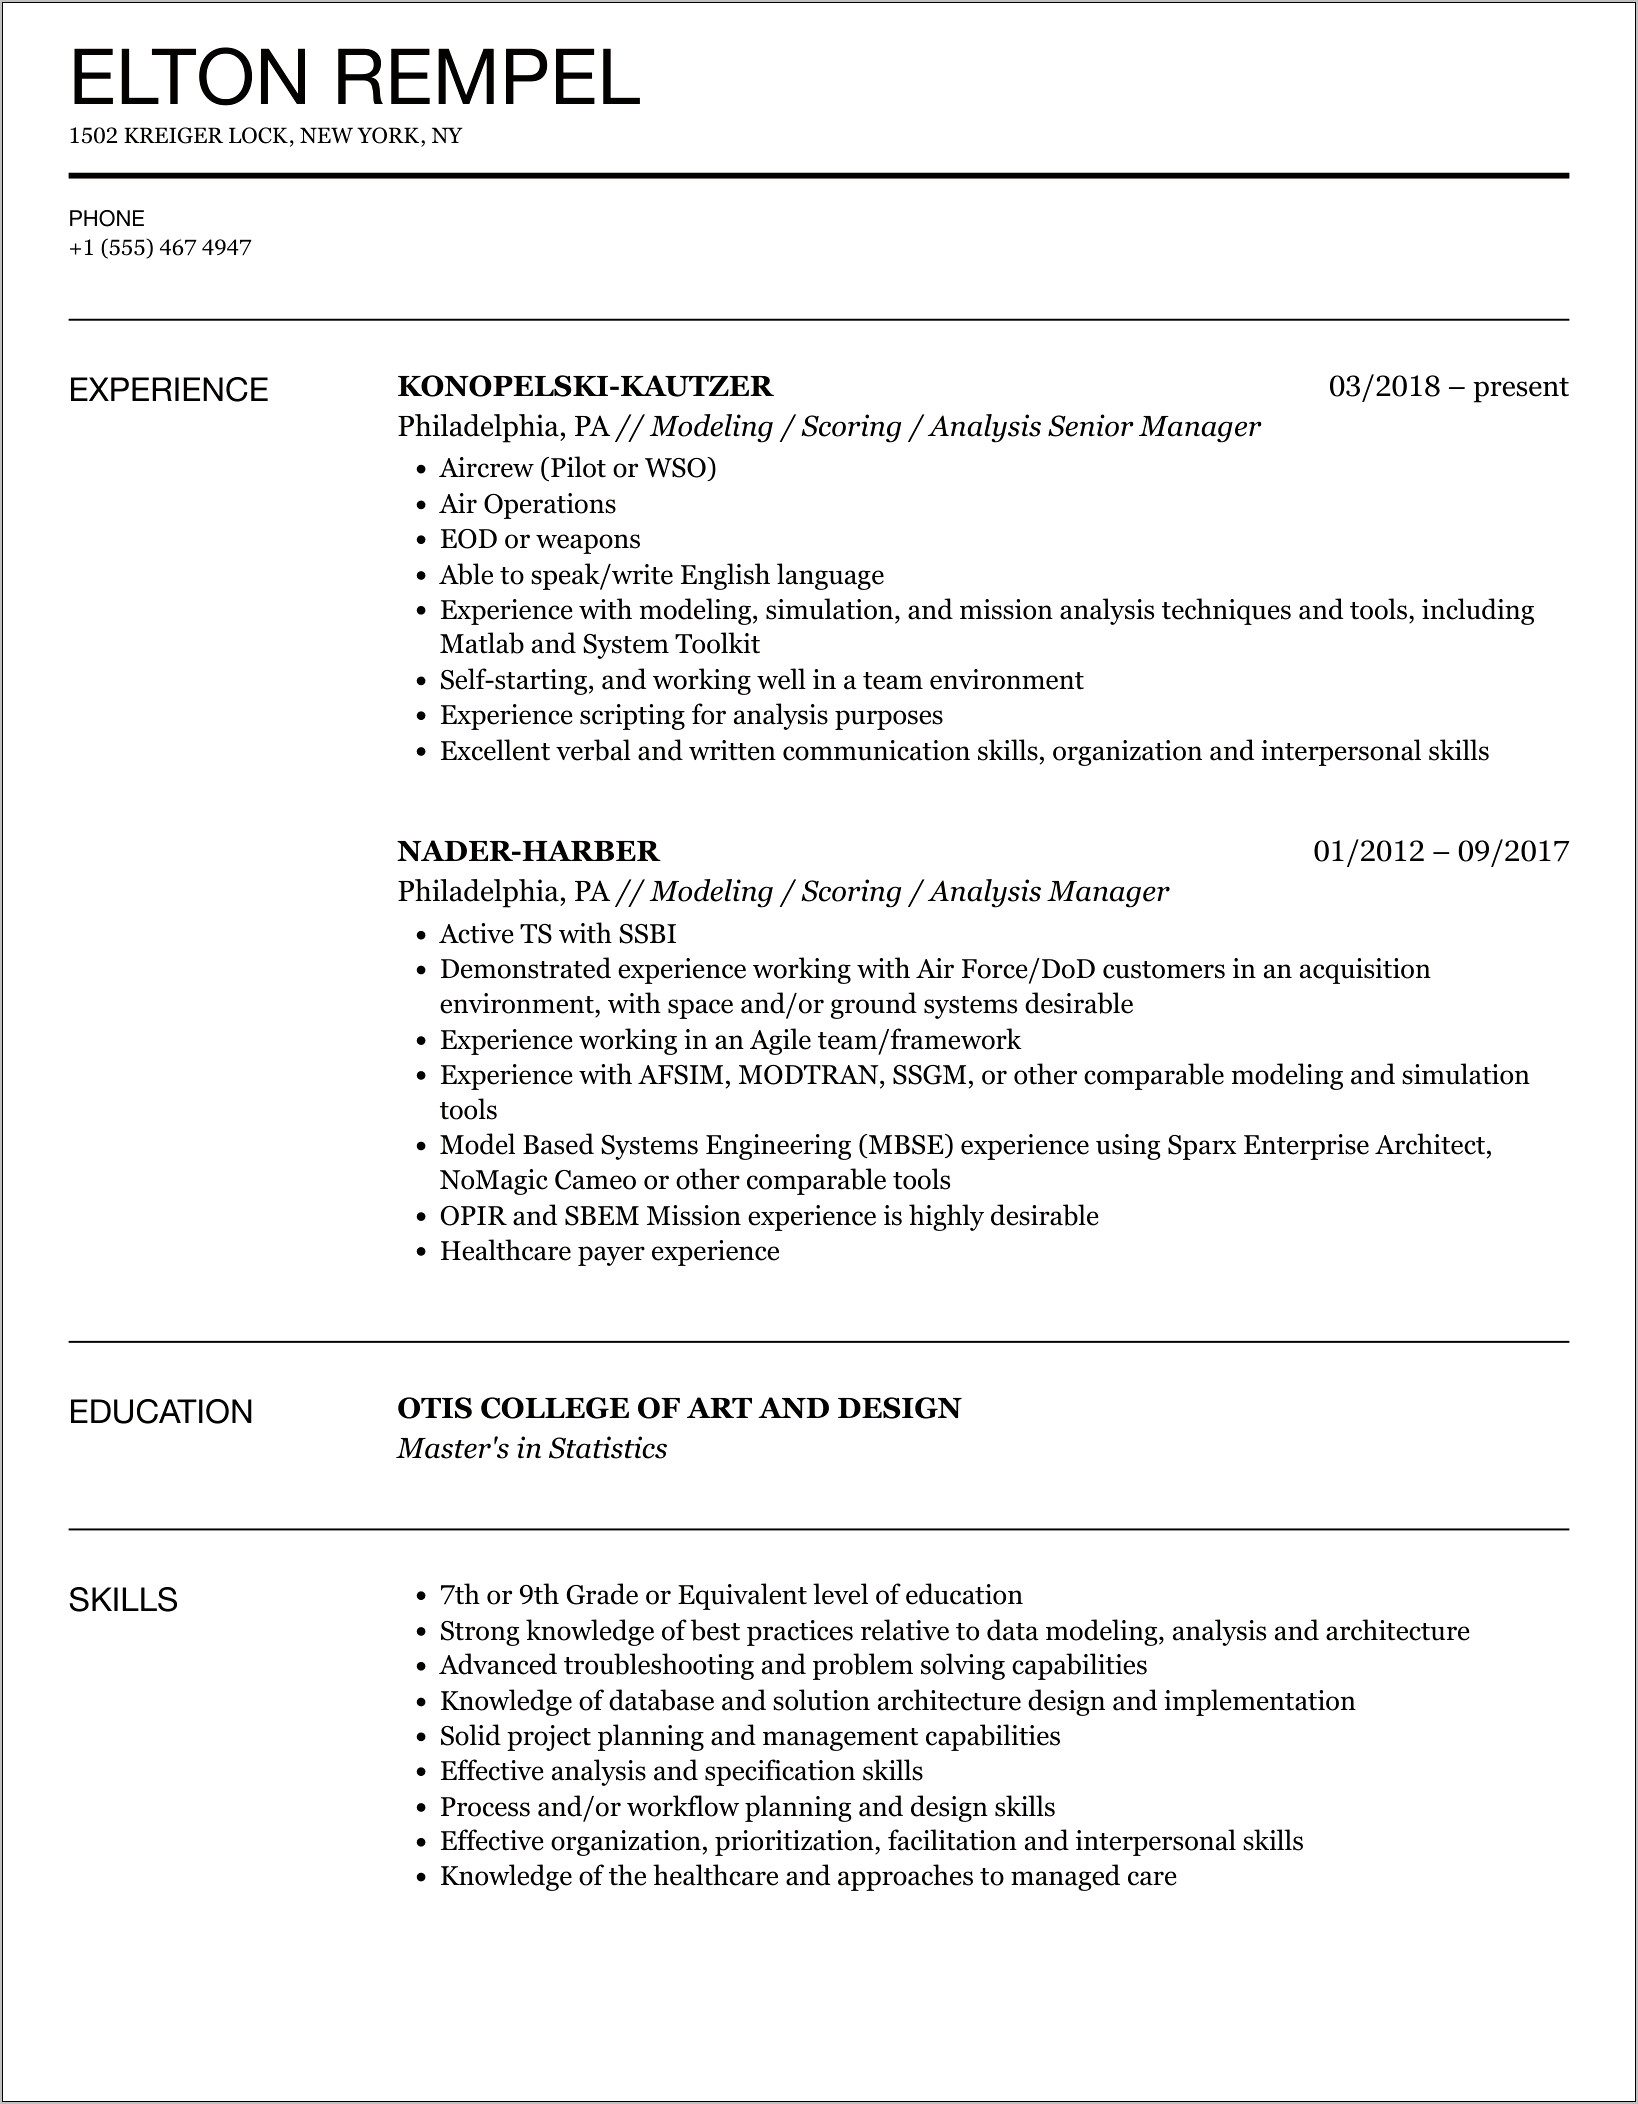 Resume After First Job Wso